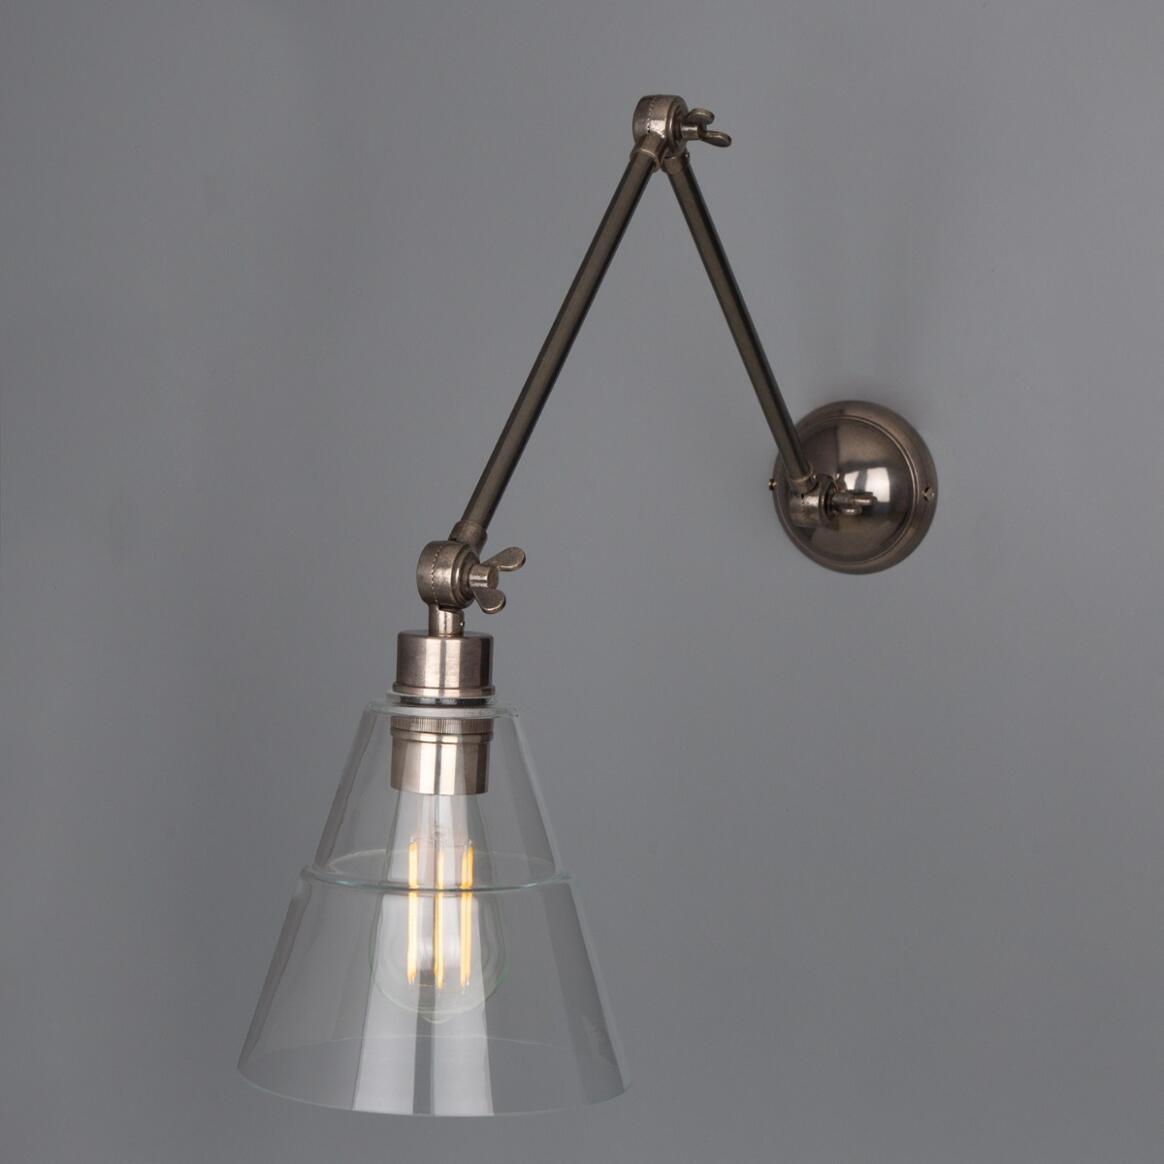 Lyx Glass Cone Adjustable Arm Wall Light